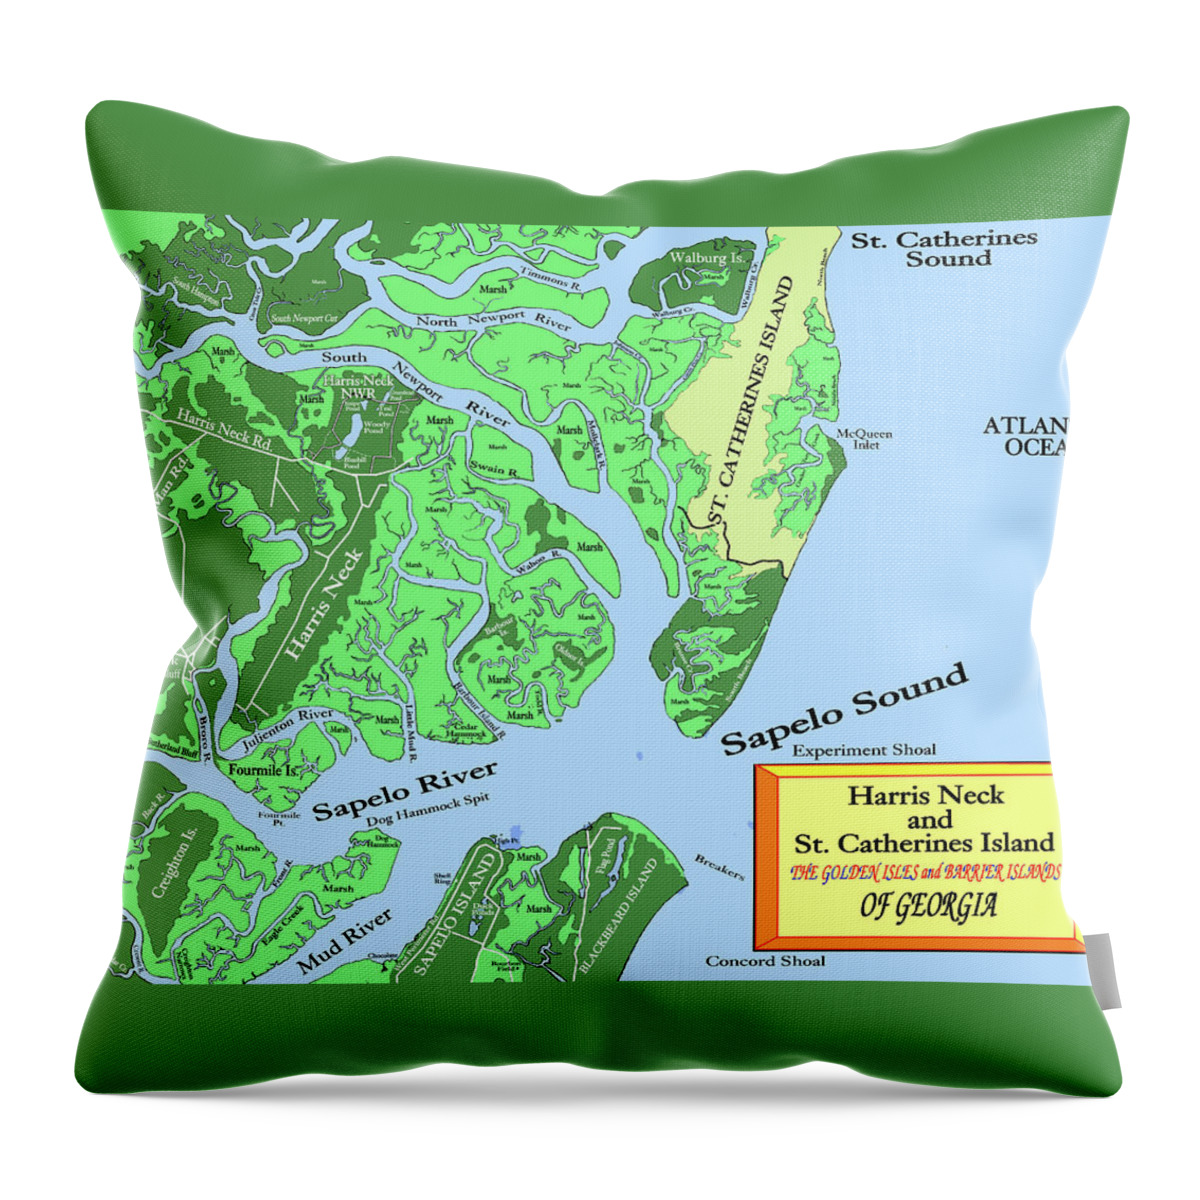 St. Catherines Island and Harris Neck refuge Throw Pillow by